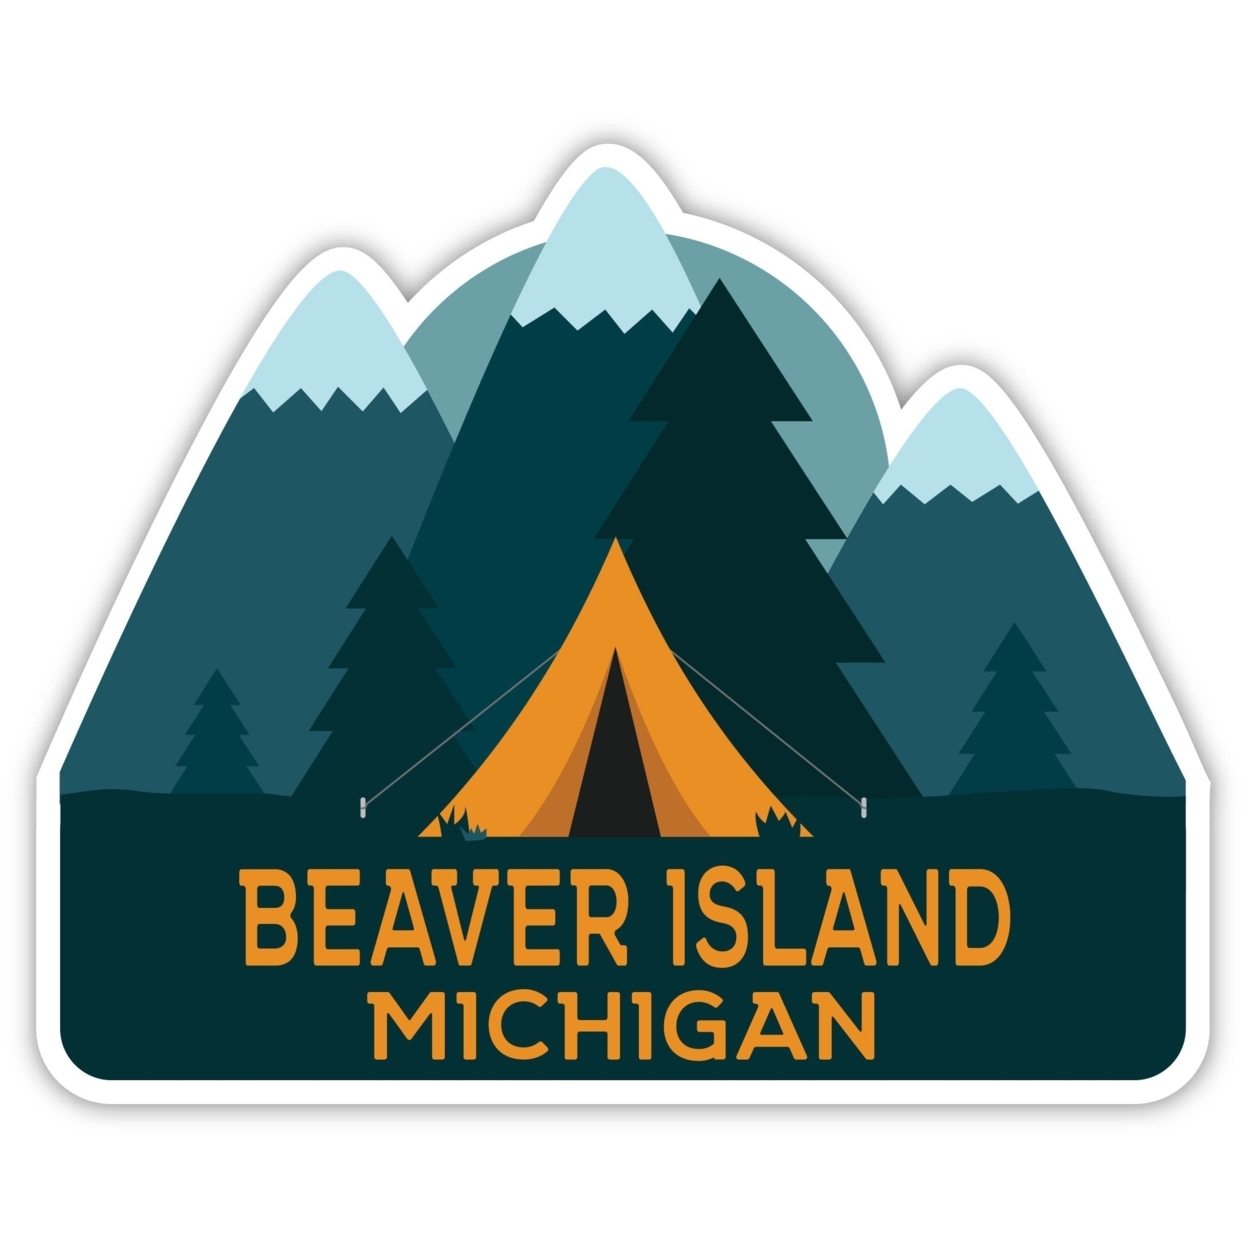 Beaver Island Michigan Souvenir Decorative Stickers (Choose Theme And Size) - 4-Pack, 2-Inch, Tent